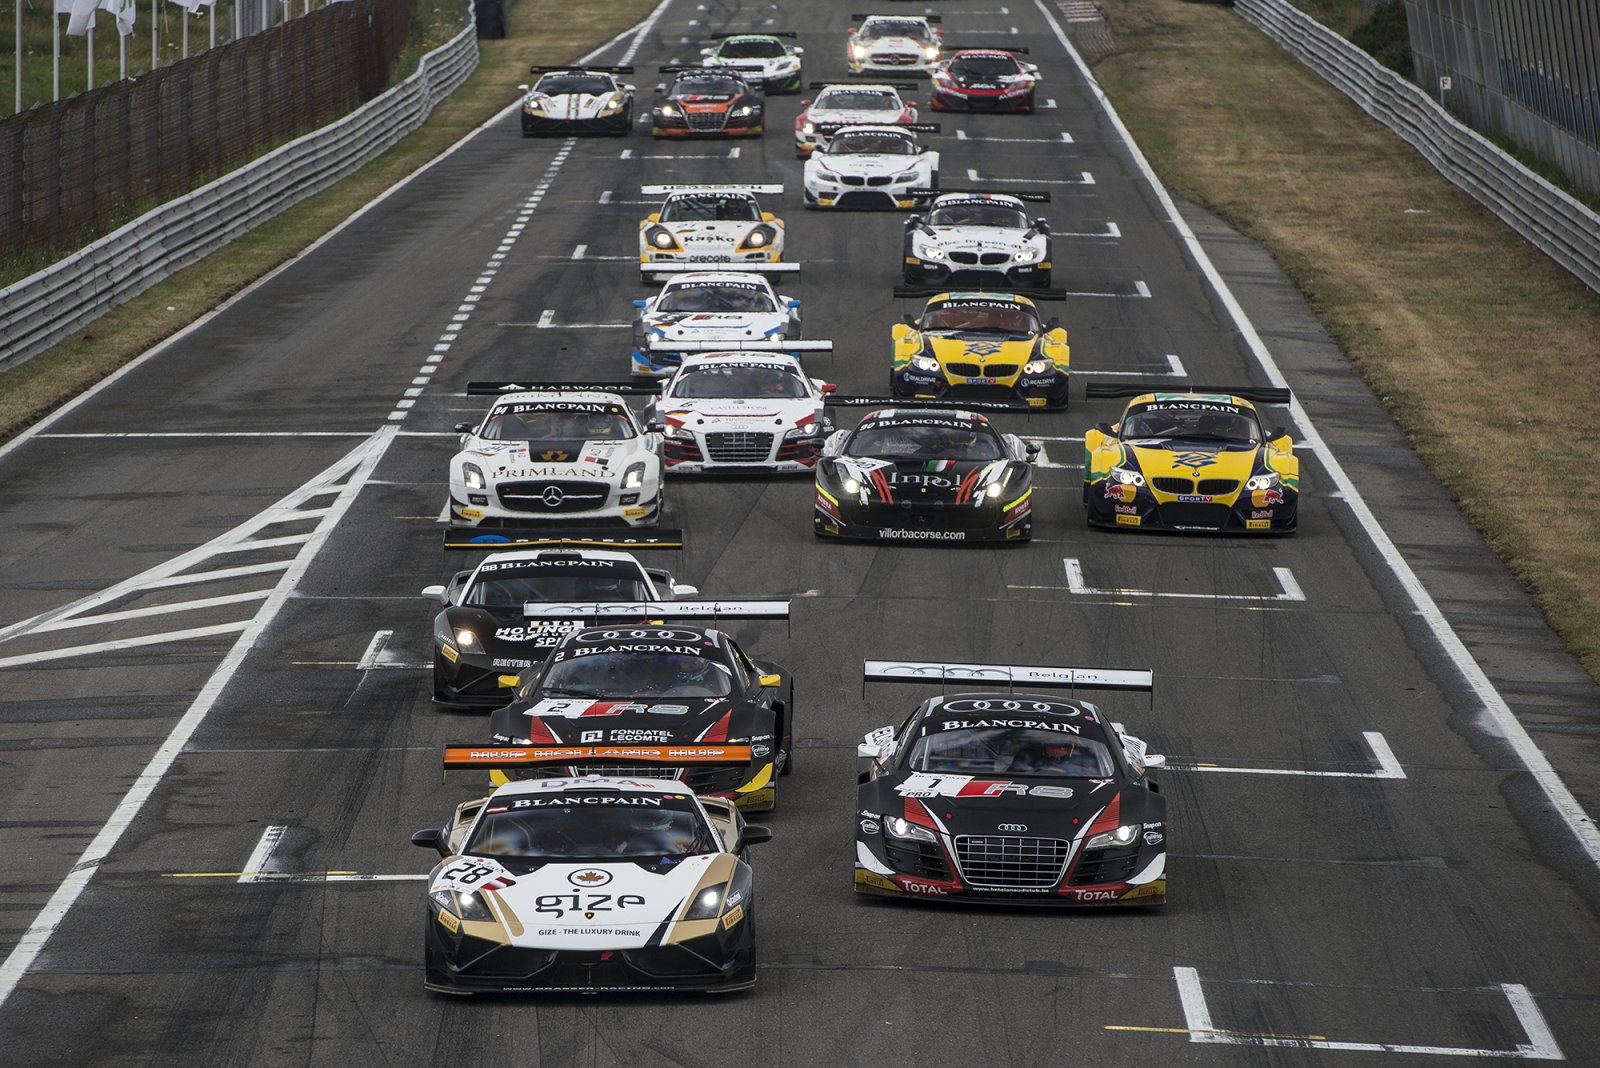 Zandvoort to replace Baku World Challenge as the final round of the Blancpain Sprint Series